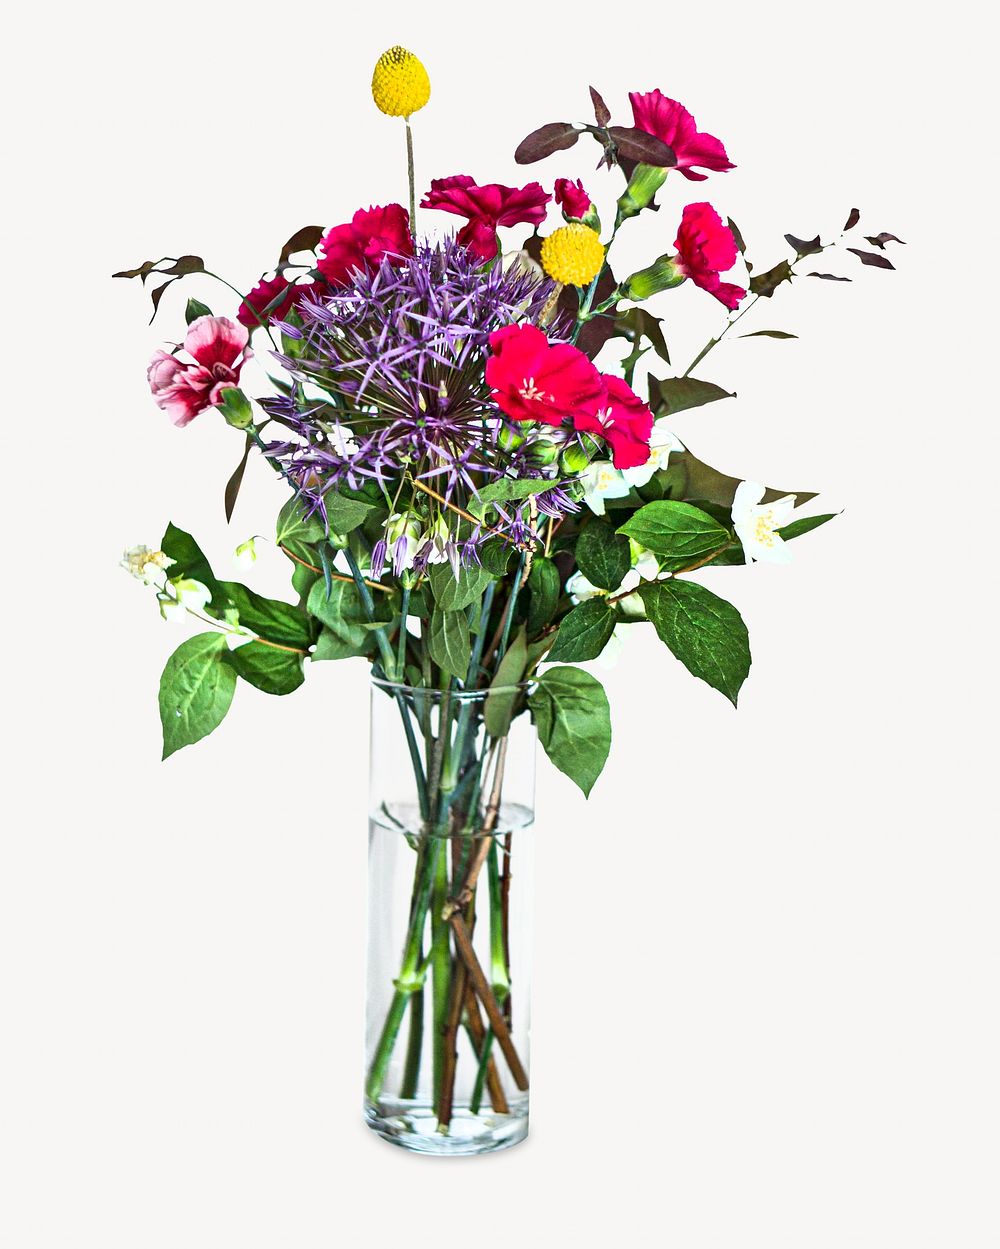 Spring flower bouquet  Isolated image